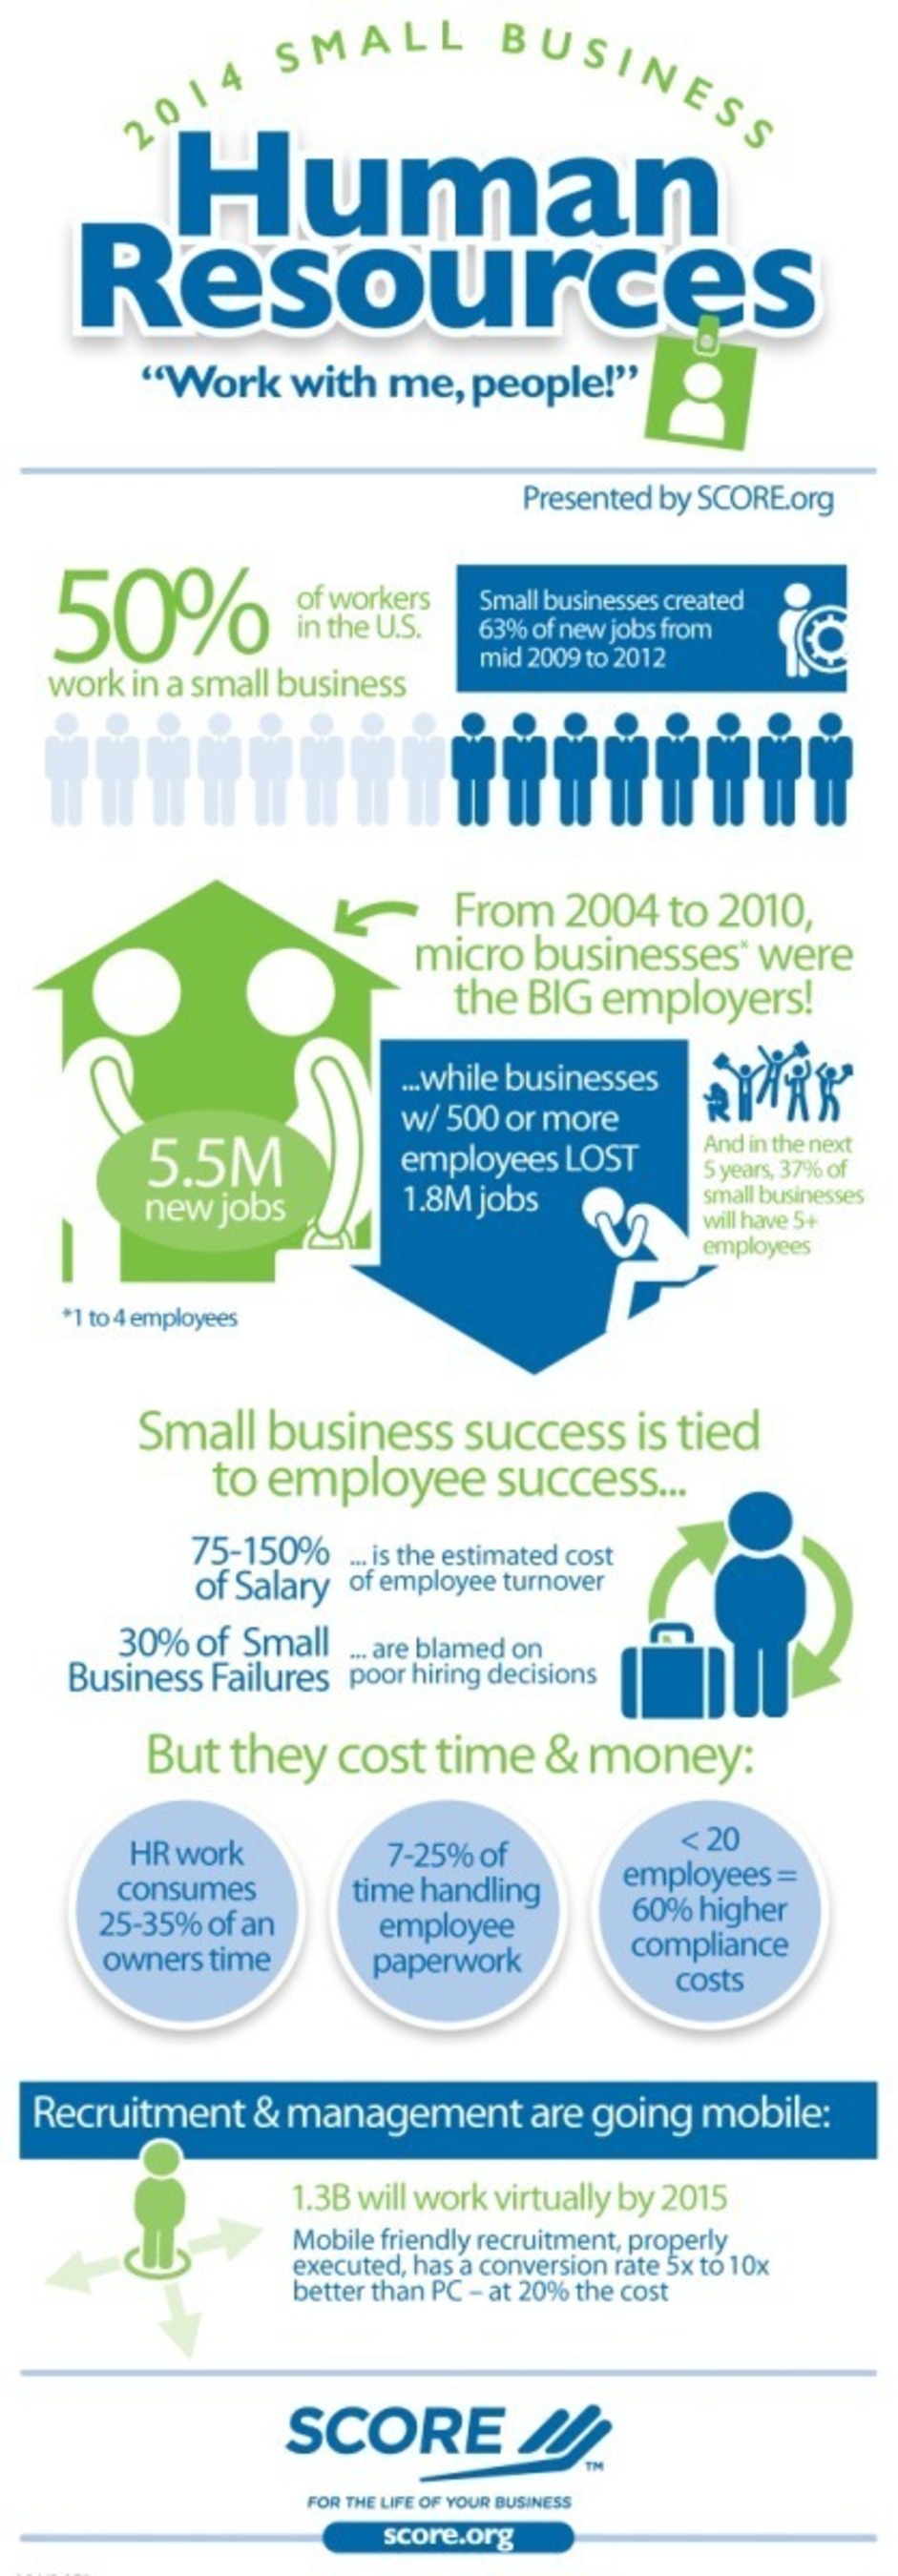 SCORE, - www.score.org - mentors to America's small businesses, has gathered statistics regarding trends in small business hiring, employment and human resource management to get a clear picture of how entrepreneurs are contributing to national employment and how human resource issues affect their businesses. Download this month's SCORE infographic for statistics on how many jobs are created by small vs. large business employers, the costs and causes of employee turnover and how much time small business owners spend on human resource management. Visit www.SCORE.org for more information or email questions to media@score.org. (PRNewsFoto/SCORE Association )